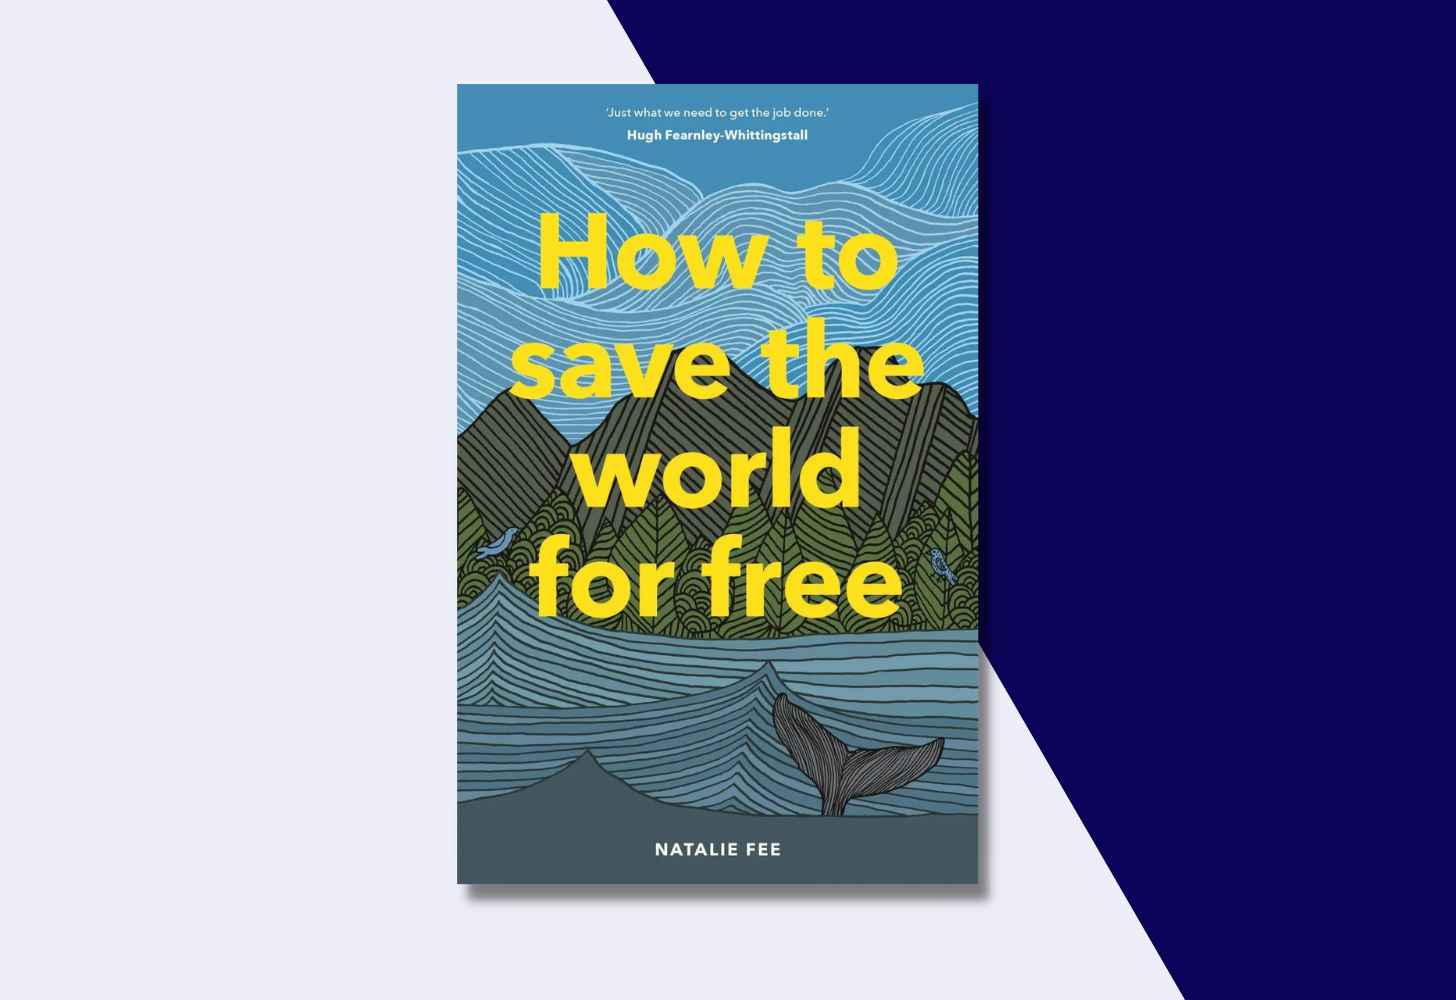 The Cover Of “How to Save the World For Free” by Natalie Fee